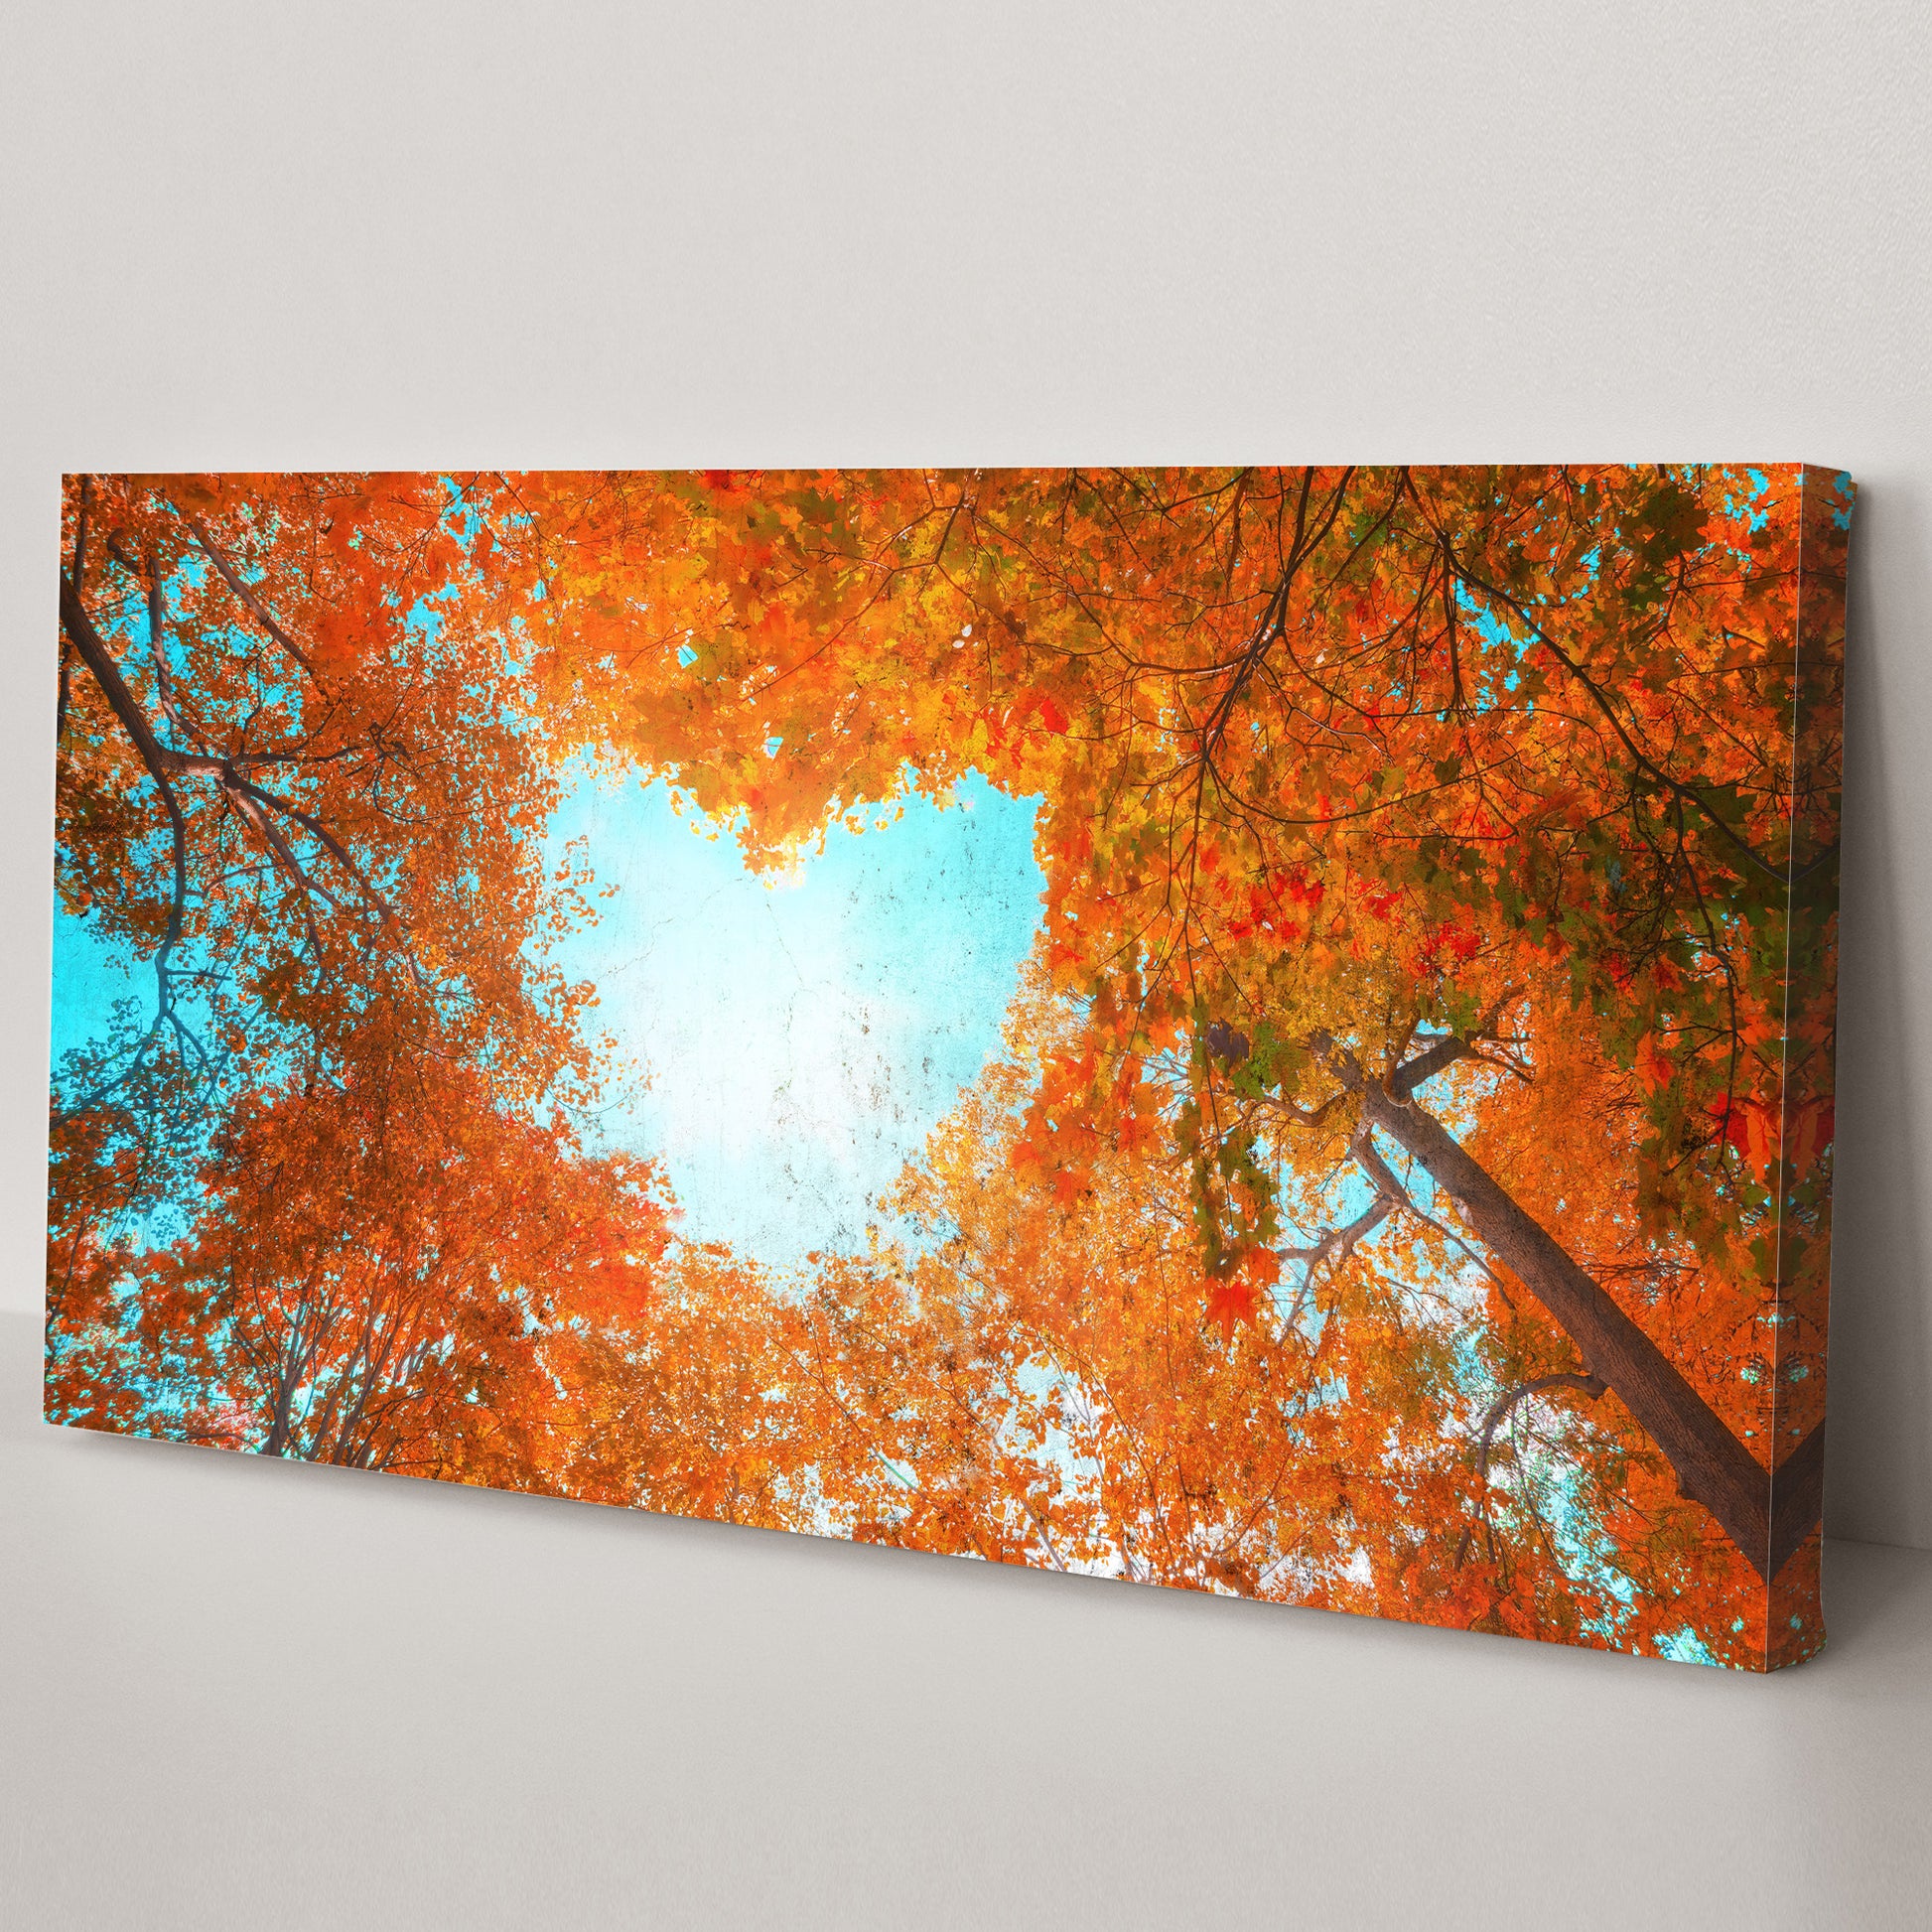 Under The Autumn Sunset Canvas Wall Art Style 2 - Image by Tailored Canvases